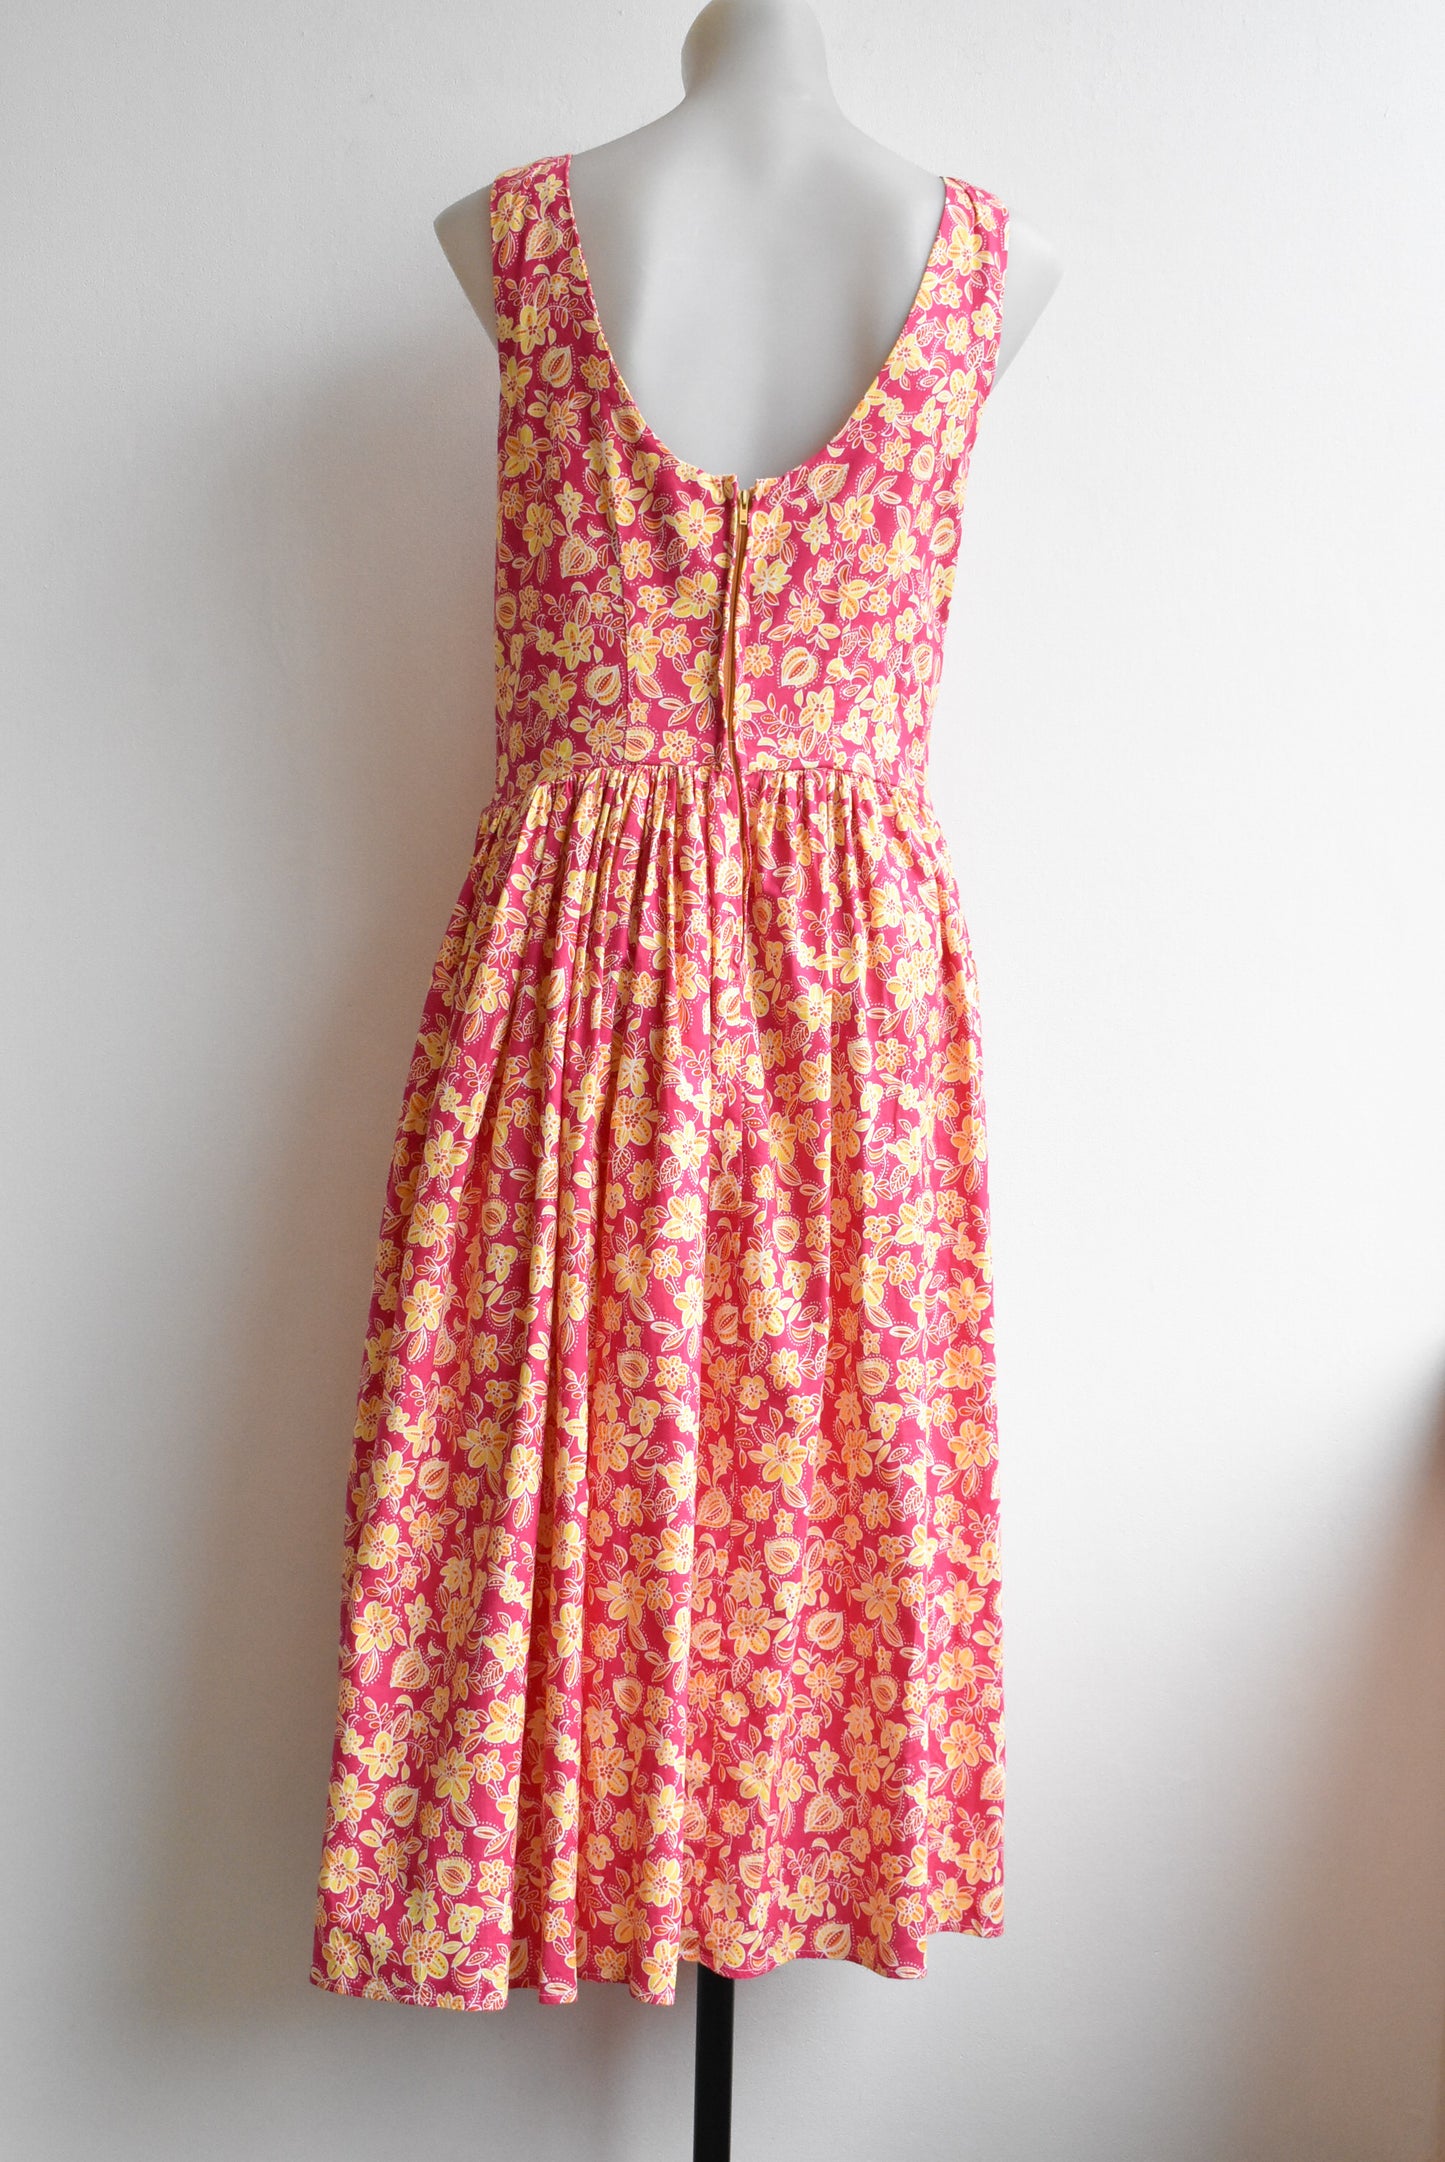 Hot pink yellow floral halter dress, size S-M